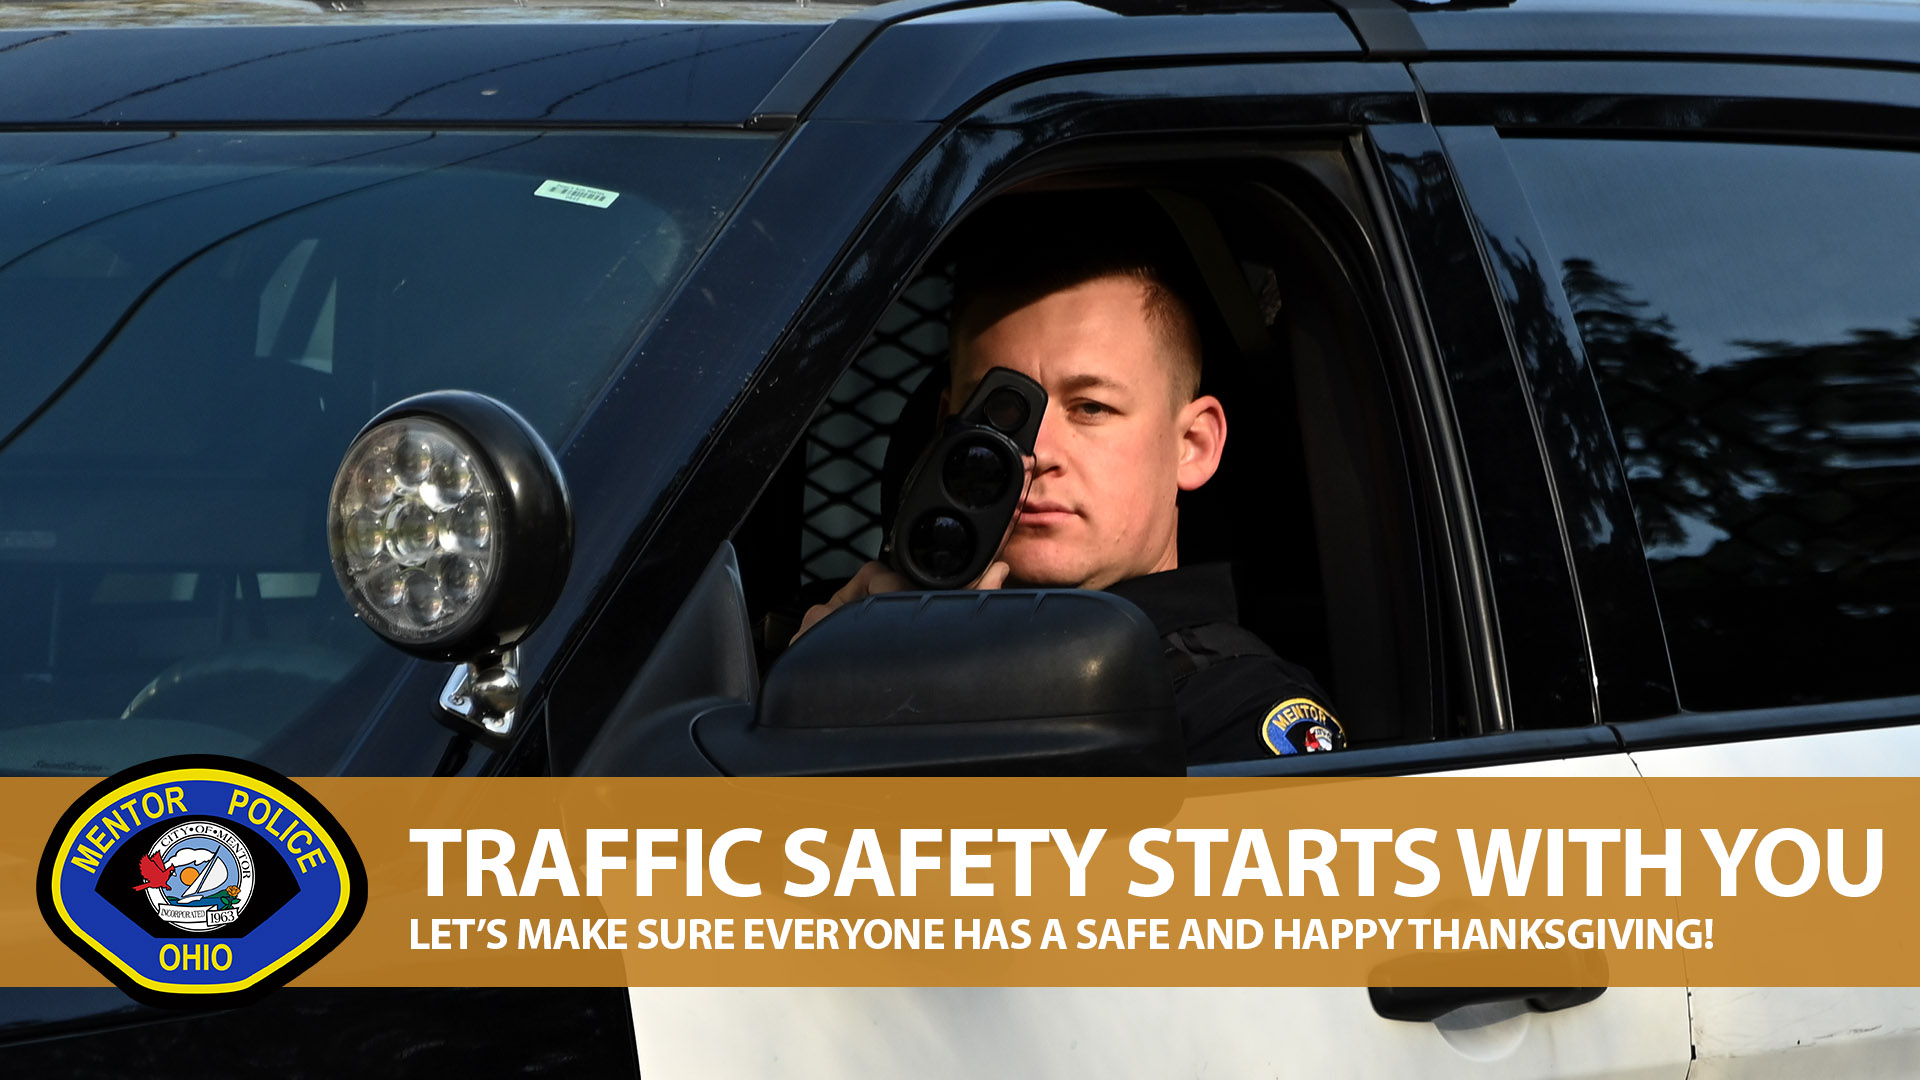 https://cityofmentor.com/wp-content/uploads/Traffic-Safety-Starts-with-You-Thanksgiving-1.jpg